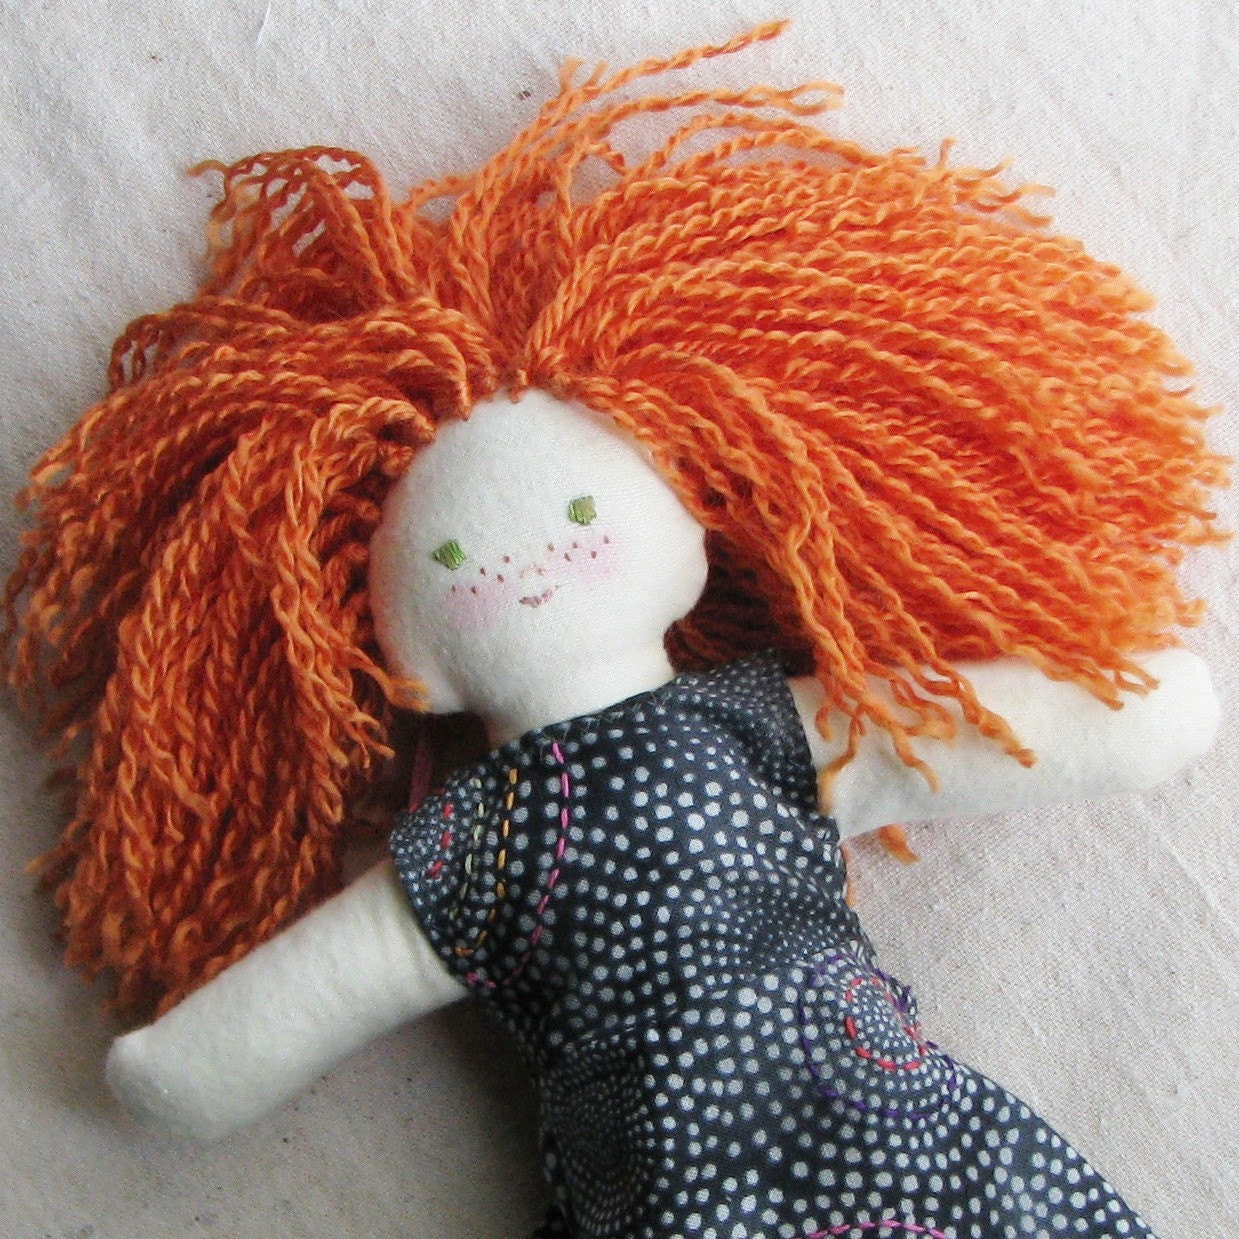 Cloth doll, 10 inch, redhead with freckles in an hand embroidered charcoal gray dress, child friendly